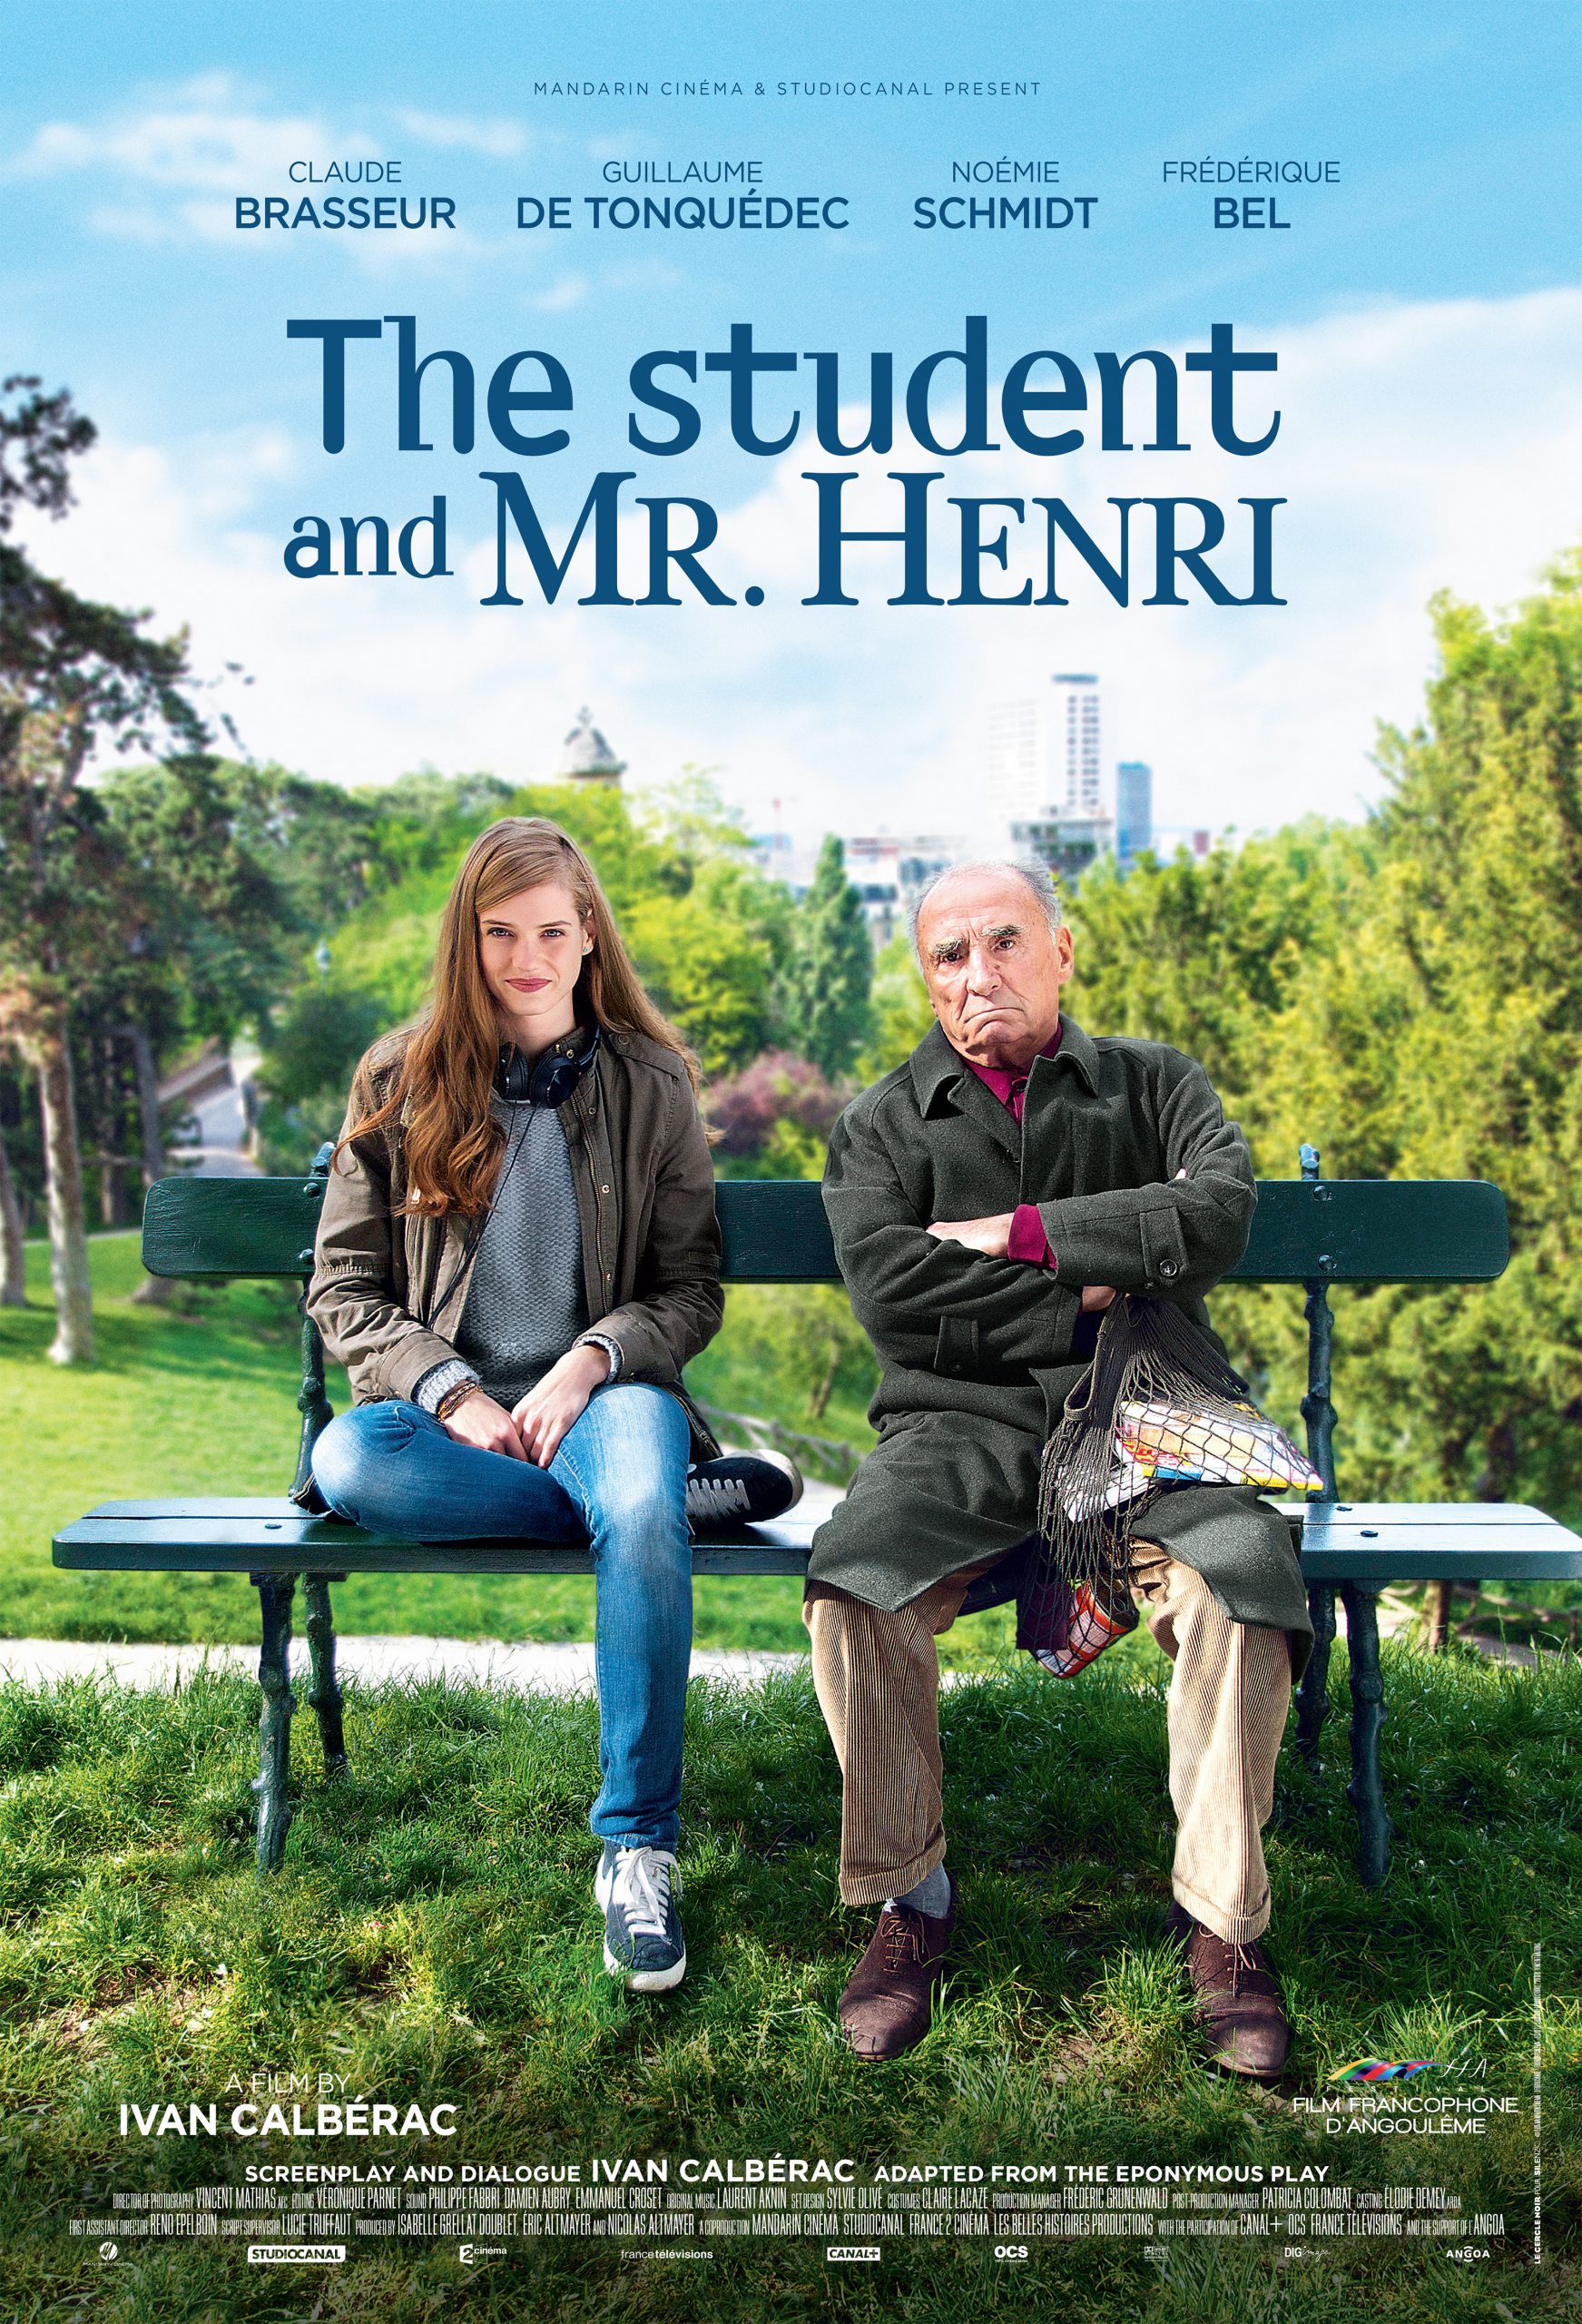 THE STUDENT AND MR HENRI